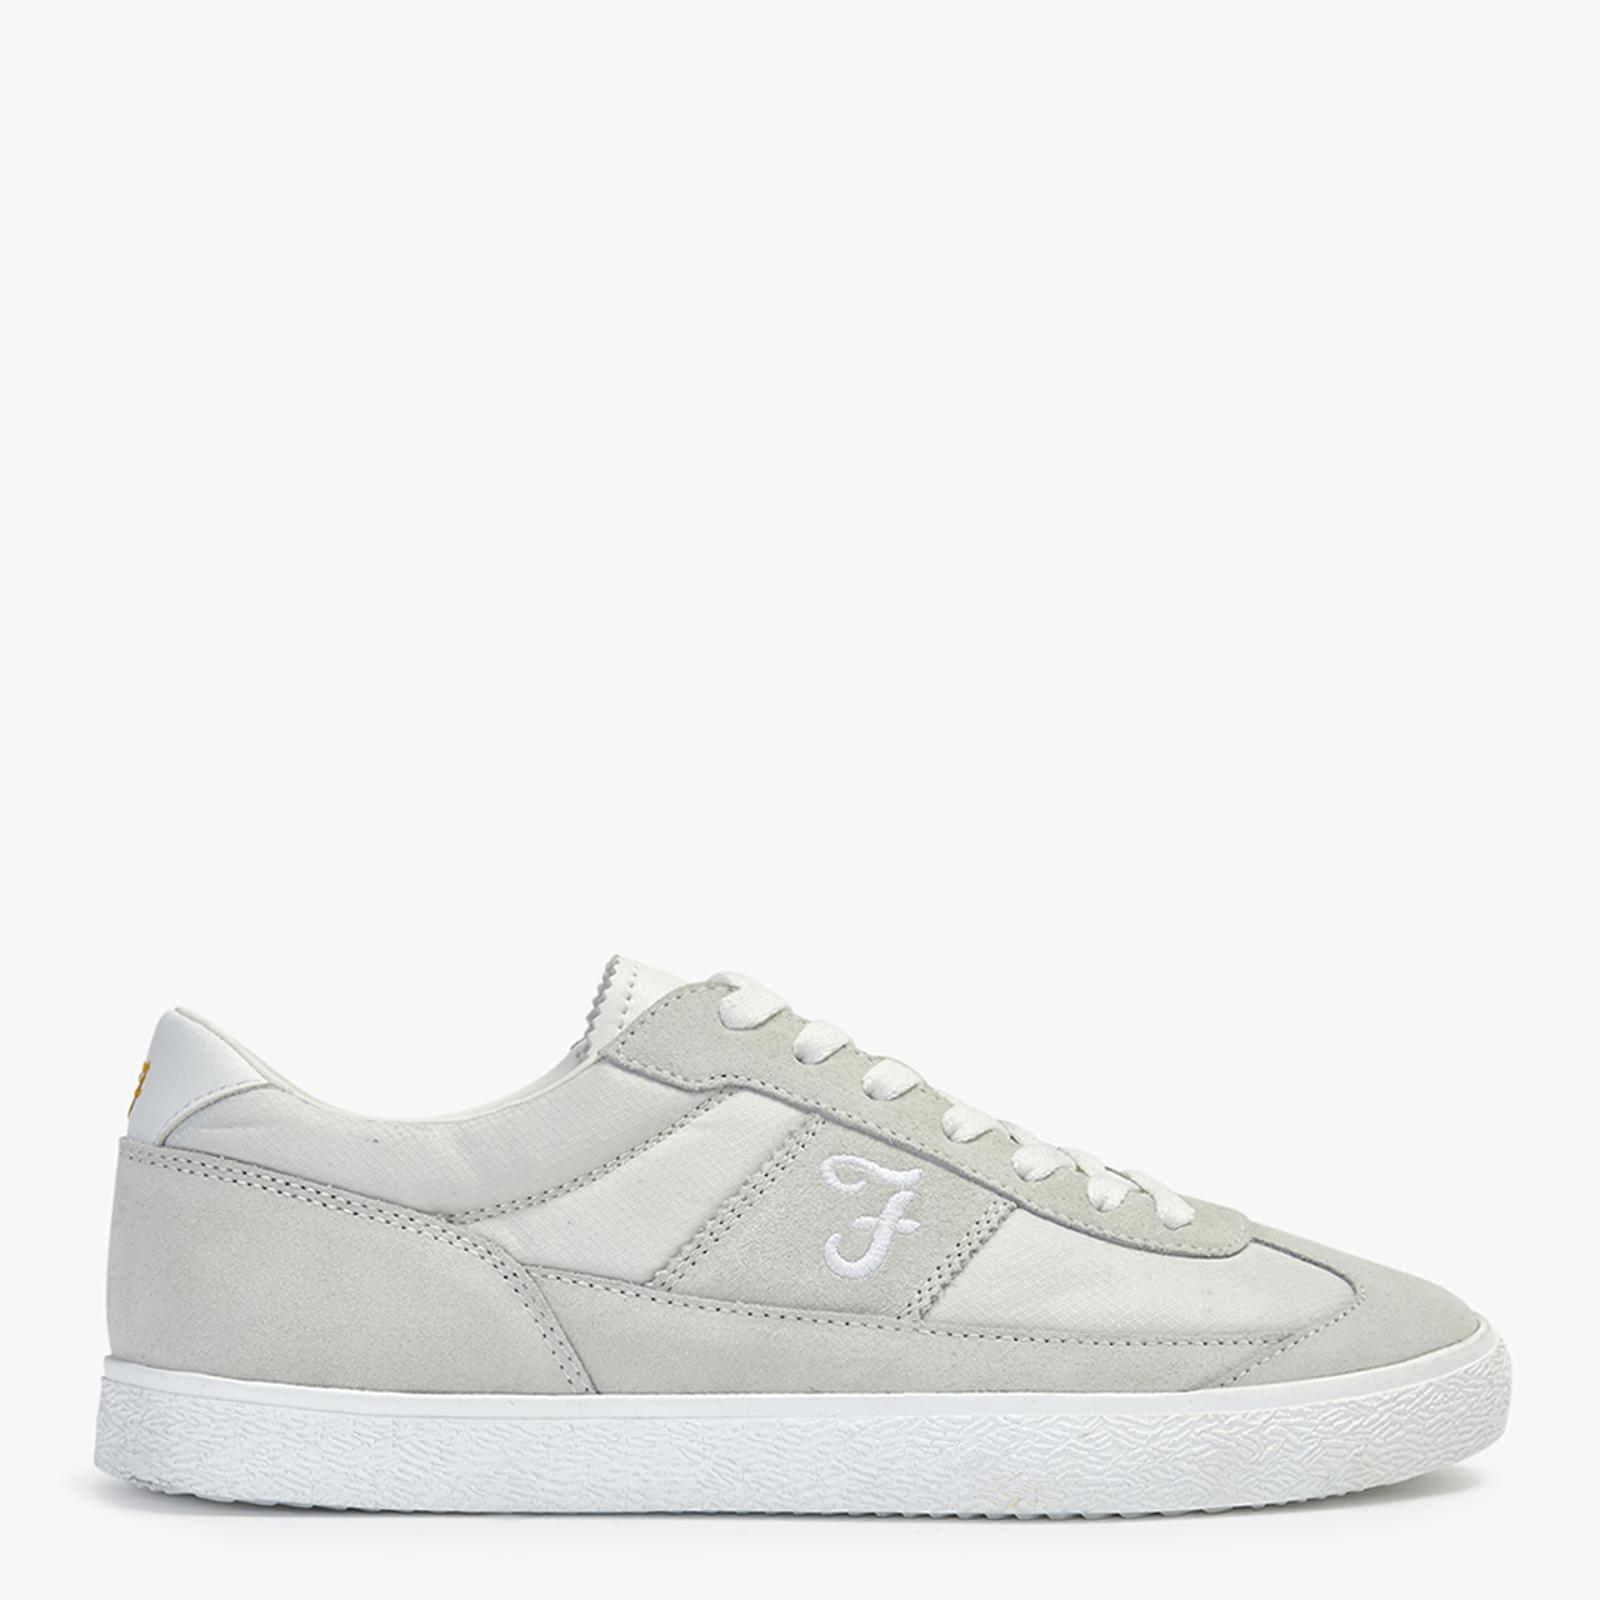 Off White Stanton Cupsole Trainers - BrandAlley